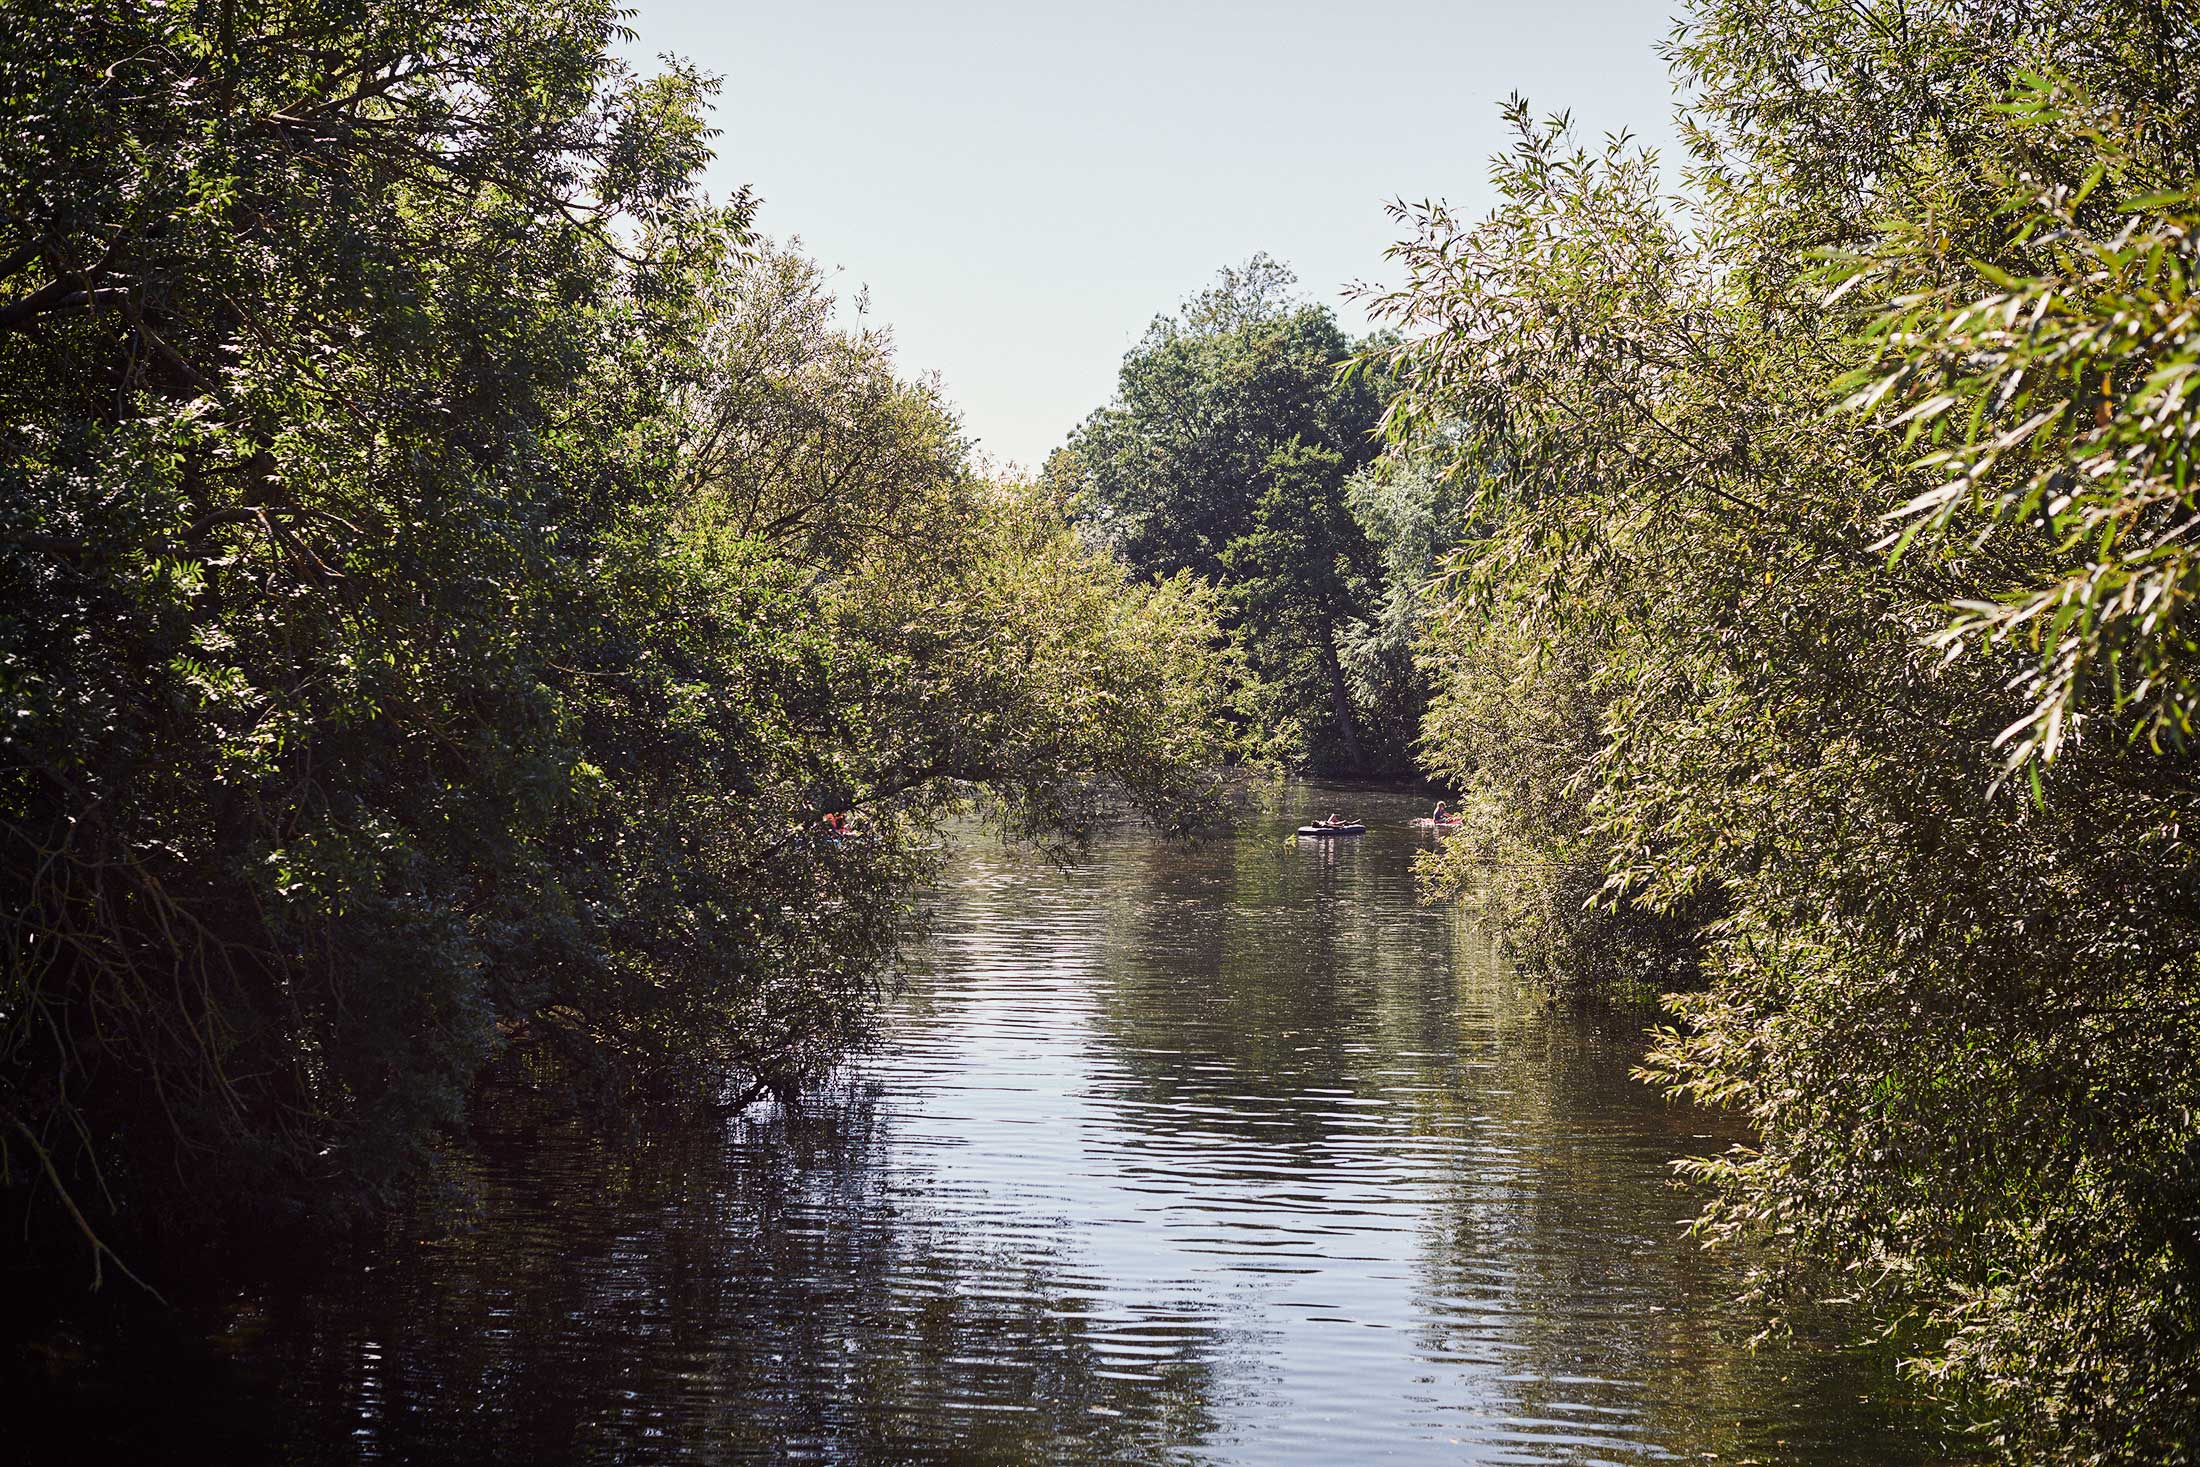 River surrounded by trees - Dedham - Beresfords Estate agents - Essex